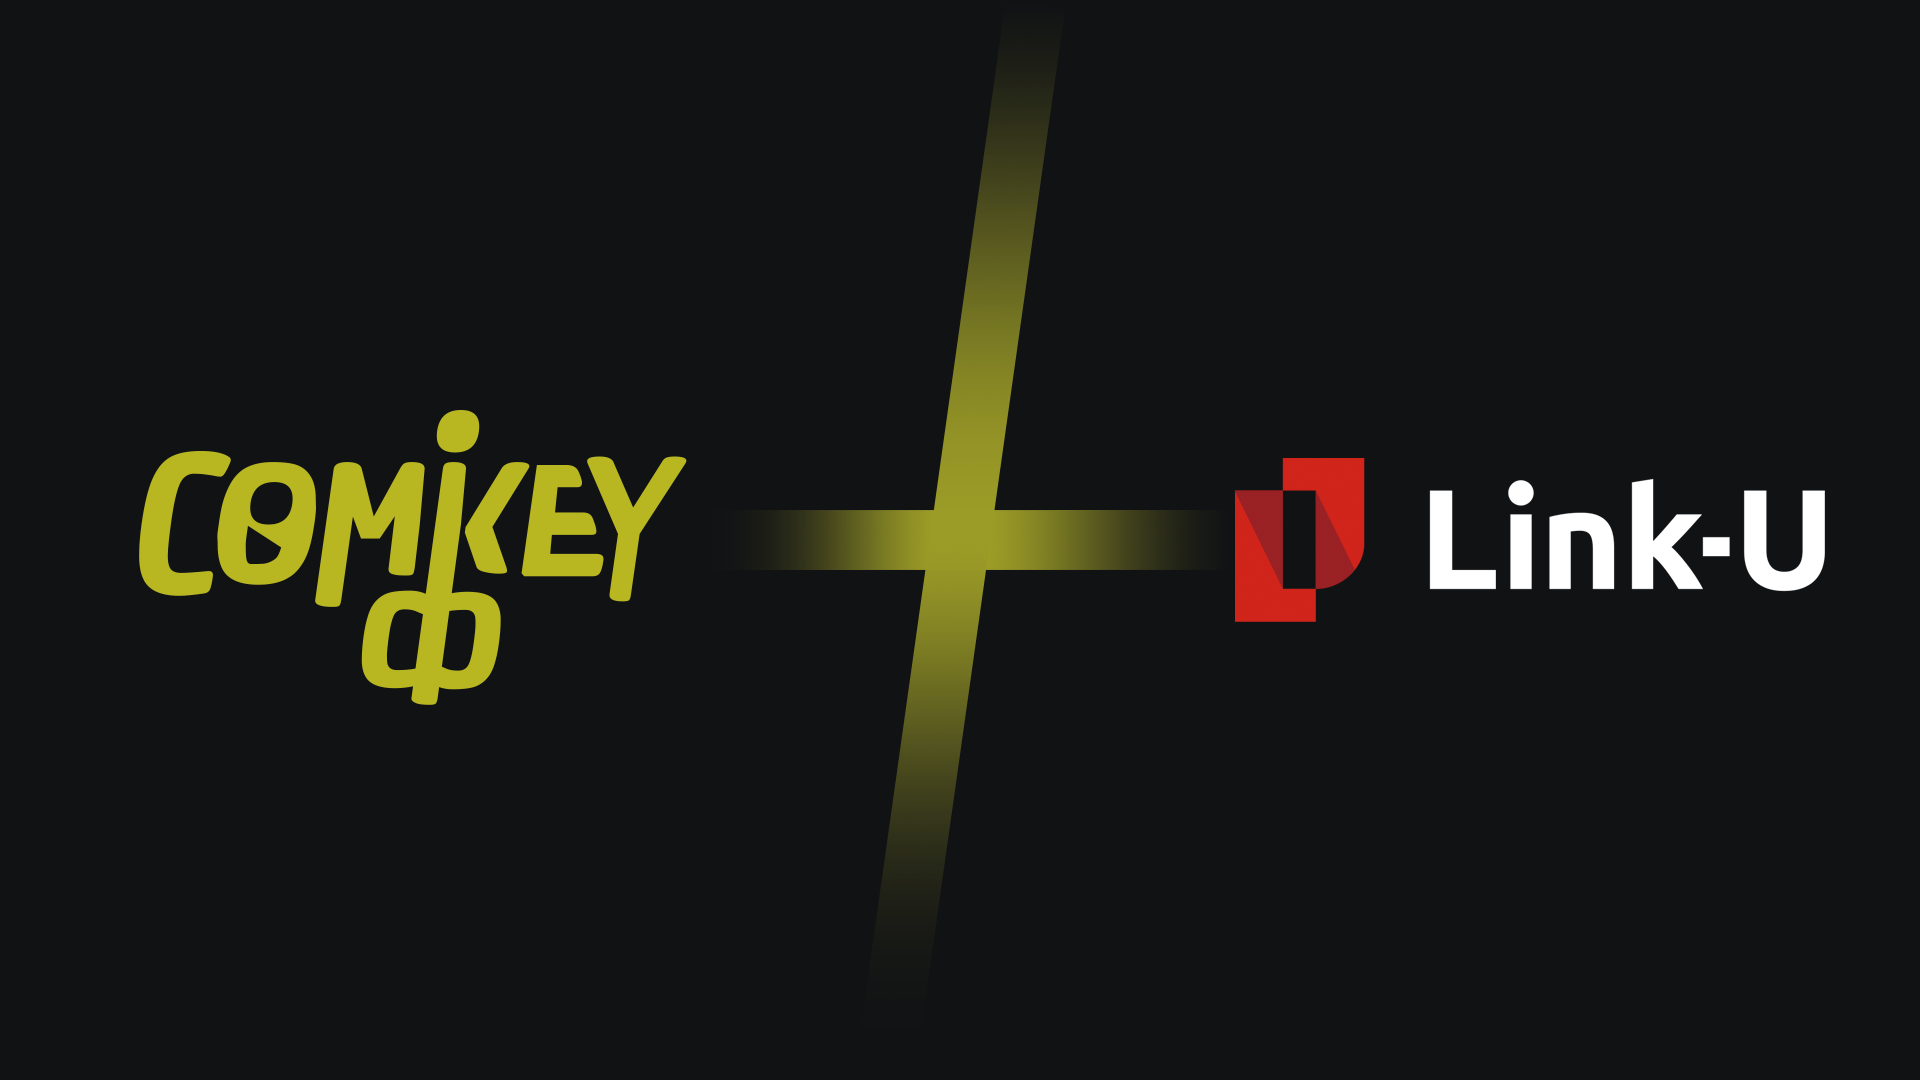 Comikey Media Inc. enters into a business alliance with Link-U Inc.